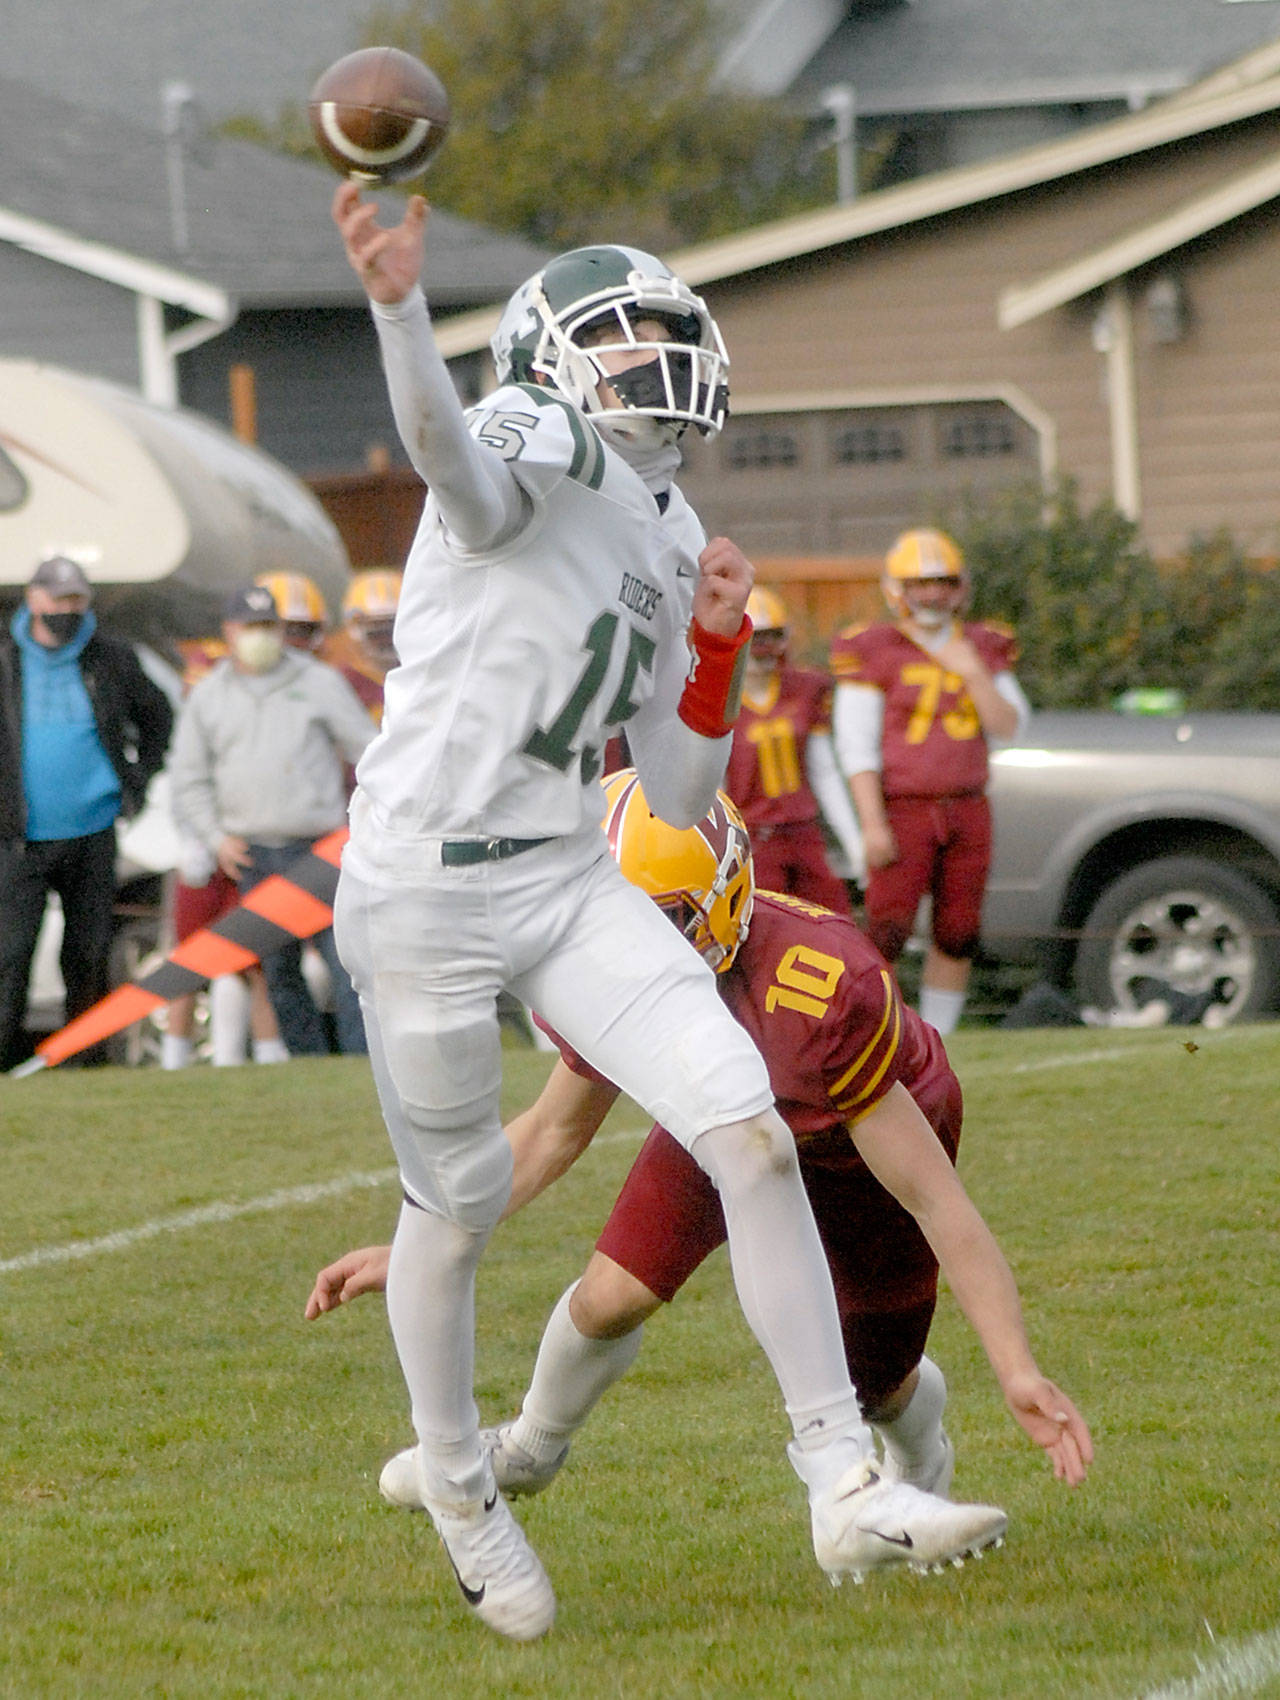 Port Angeles quarterback Parker Nickerson gets off a pass as Kingston’s Kyler Coe-yarr closes in during a Roughriders win earlier this year. (Keith Thorpe/Peninsula Daily News)